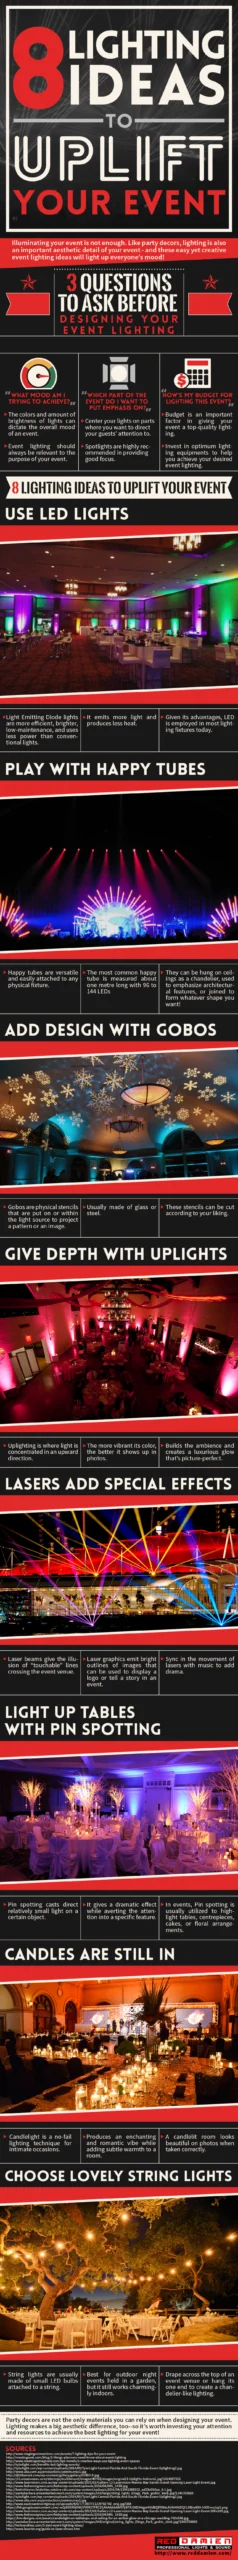 8 Best Lighting Ideas For Your Event! (InfoGraphic)
